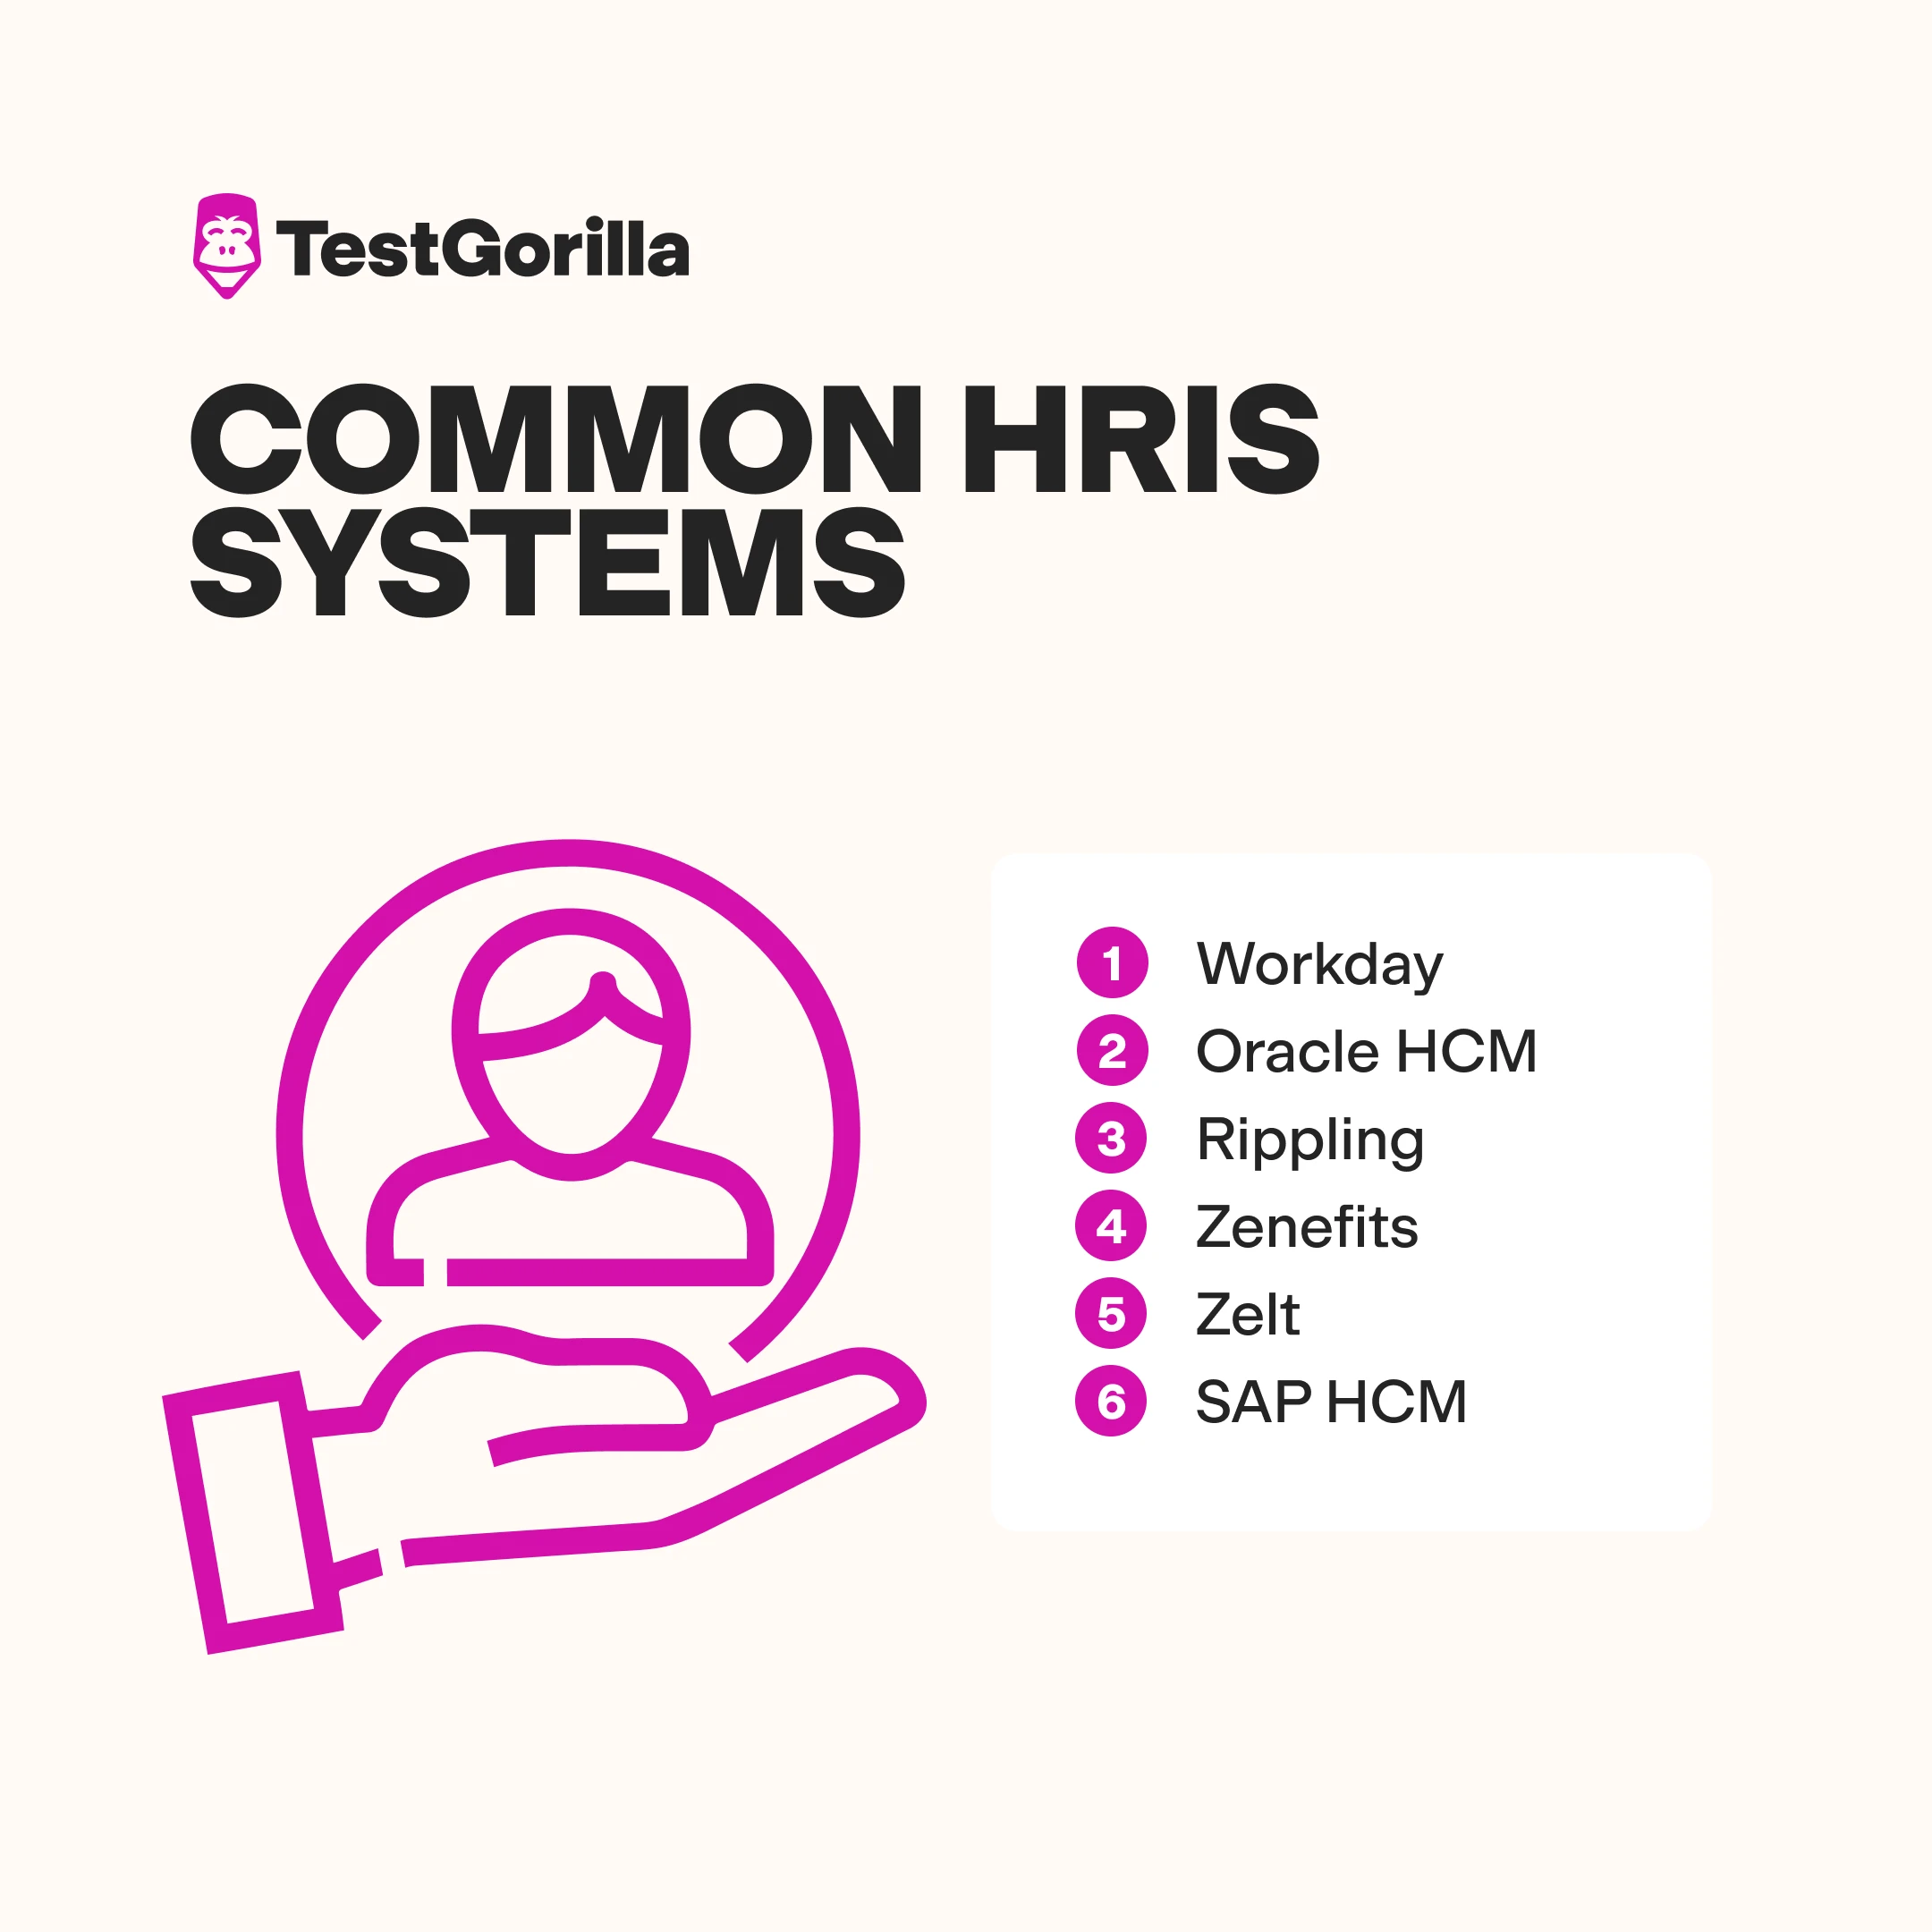 Common HRIS systems